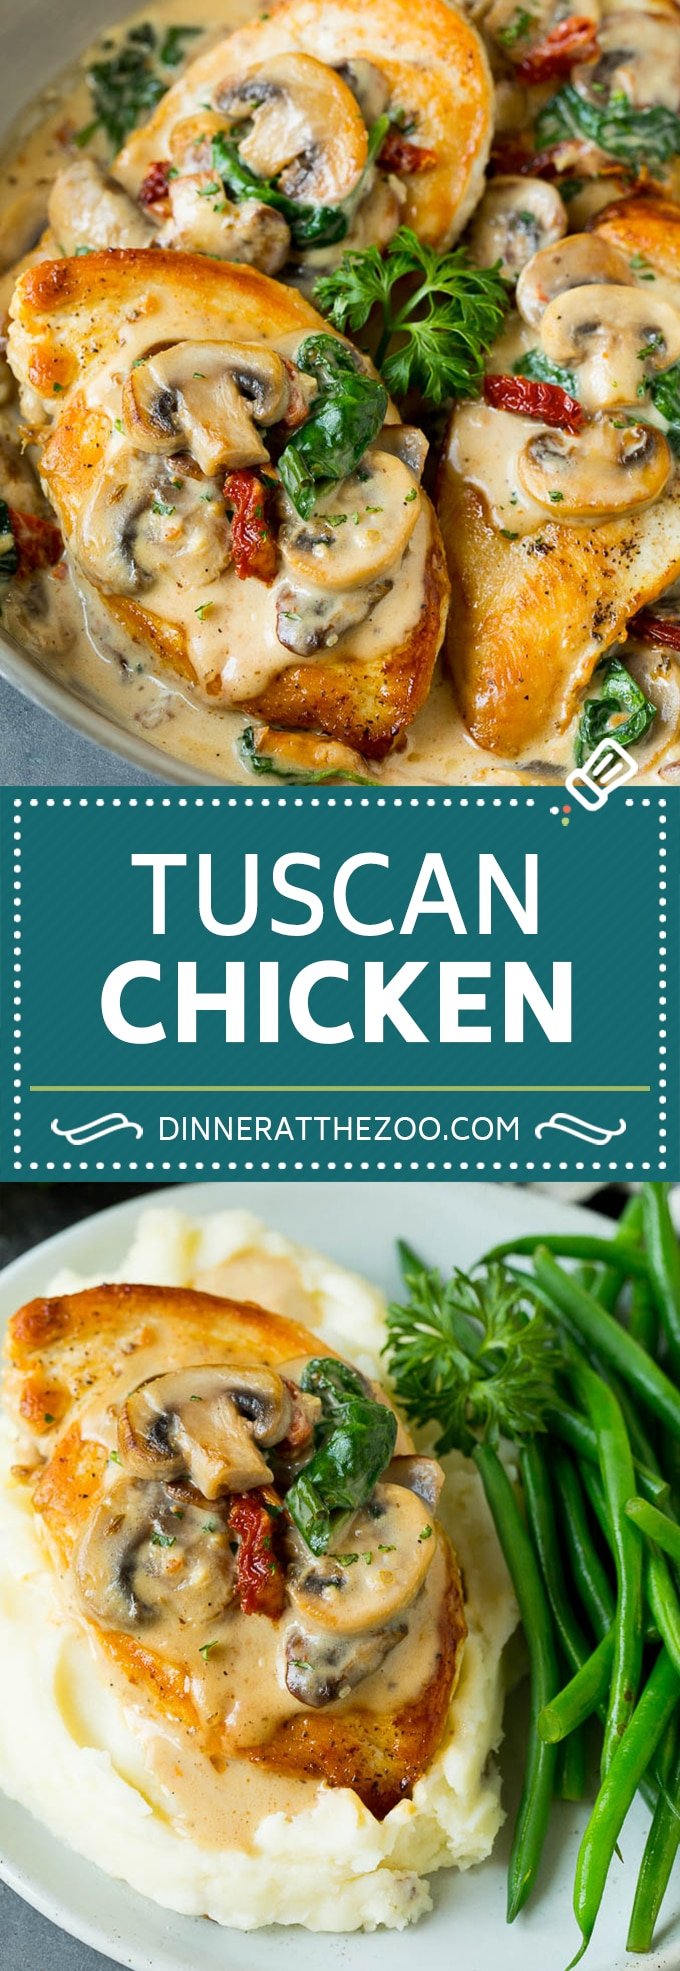 This Tuscan chicken is golden brown chicken breasts coated in a creamy parmesan, mushroom, sun dried tomato and spinach sauce.